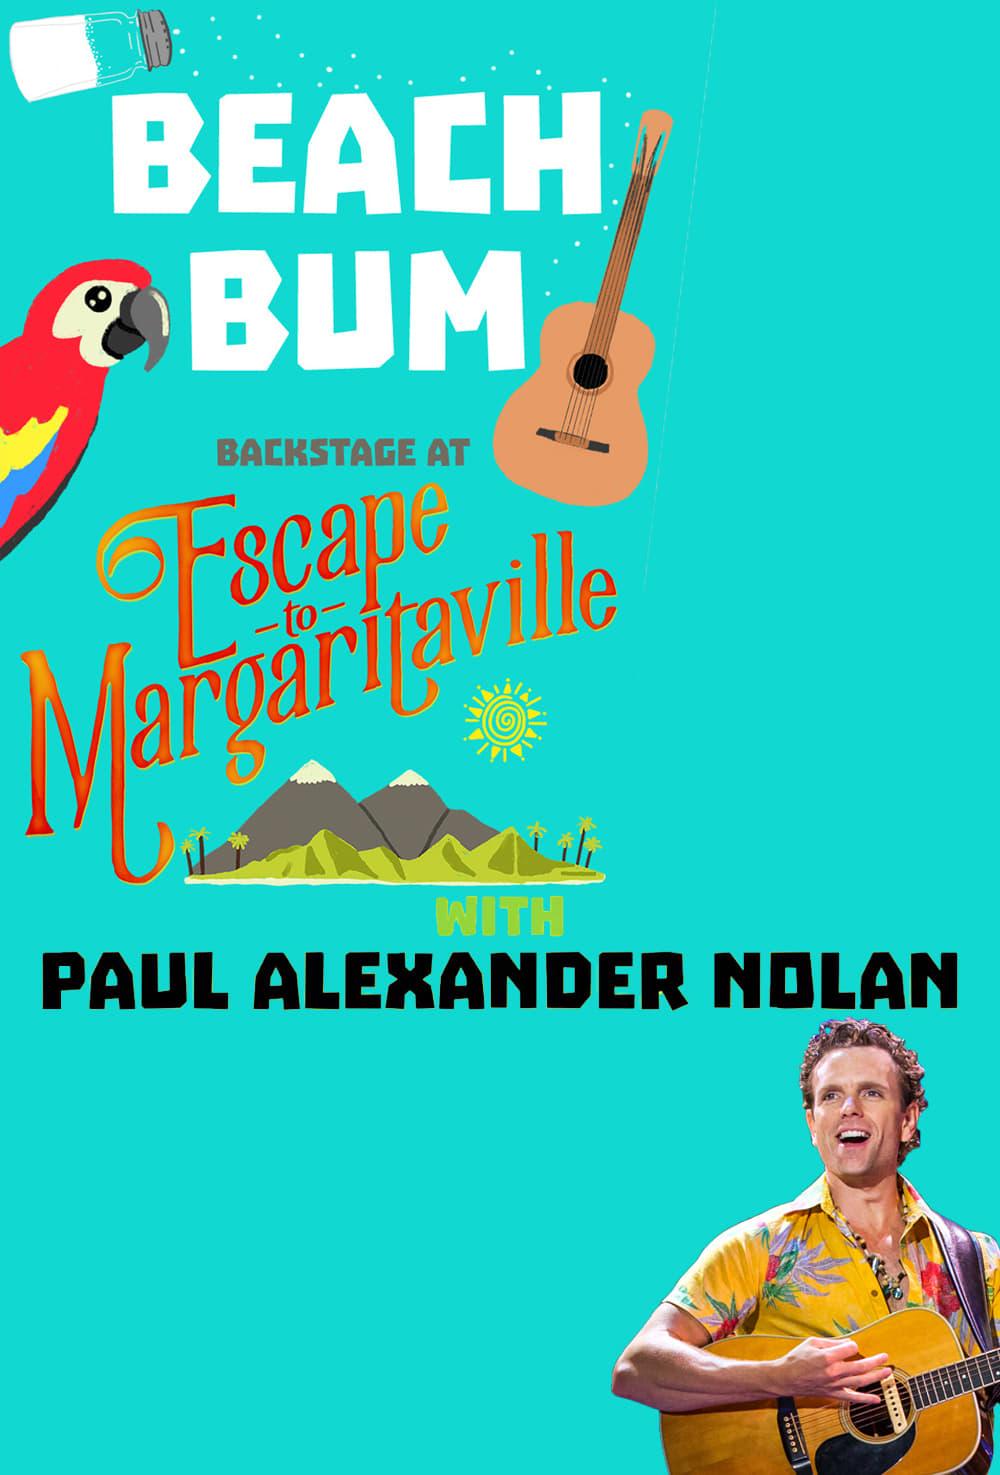 Beach Bum: Backstage at 'Escape to Margaritaville' with Paul Alexander Nolan poster